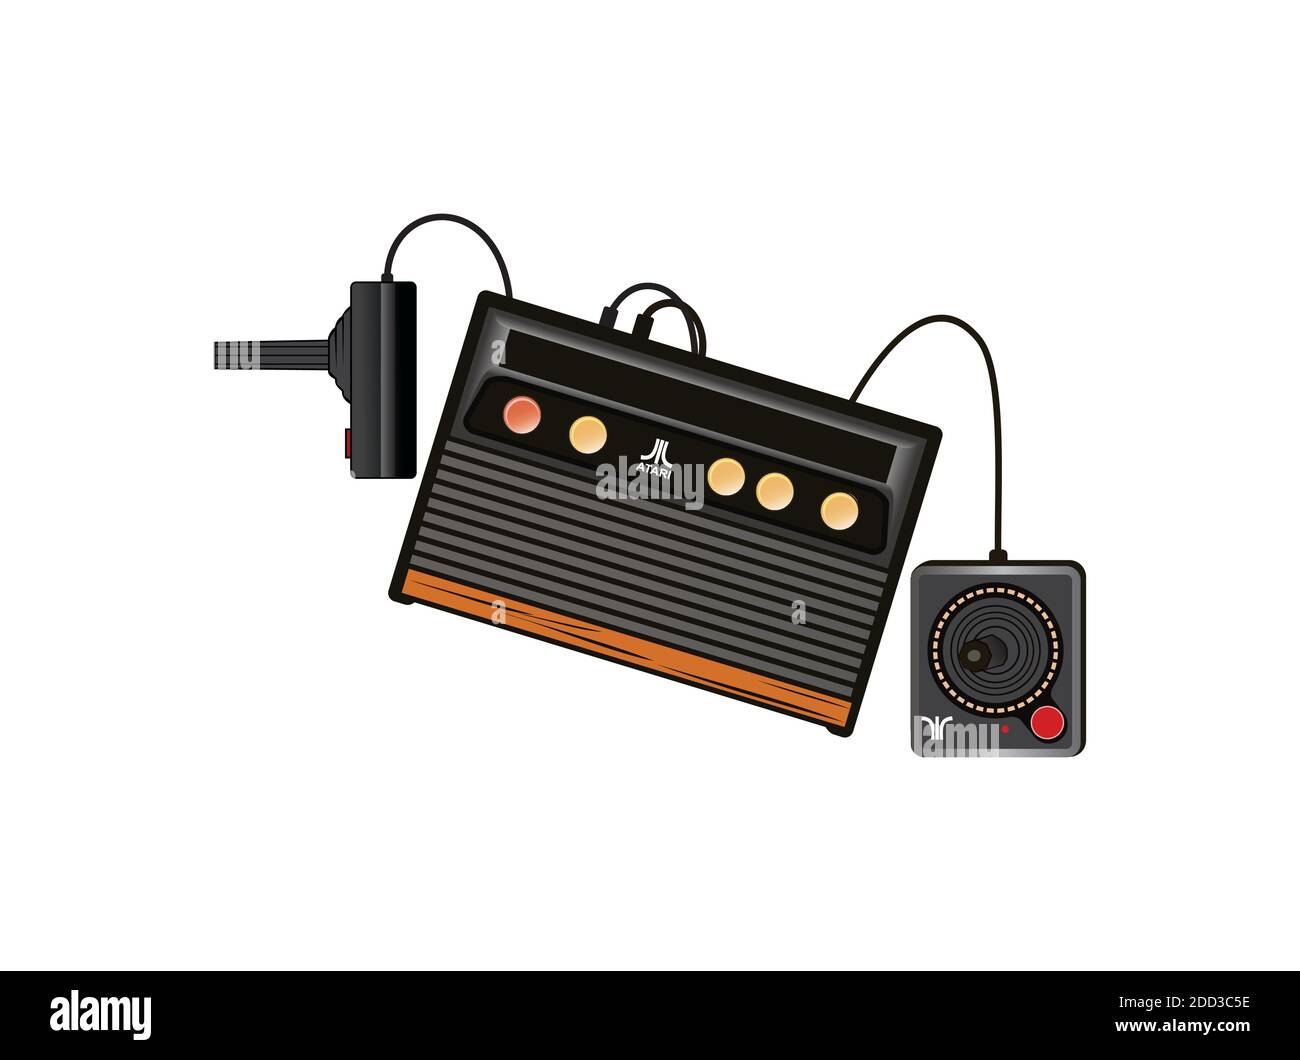 Classic Atari game console design illustration vector eps format , suitable for your design needs, logo, illustration, animation, etc. Stock Vector